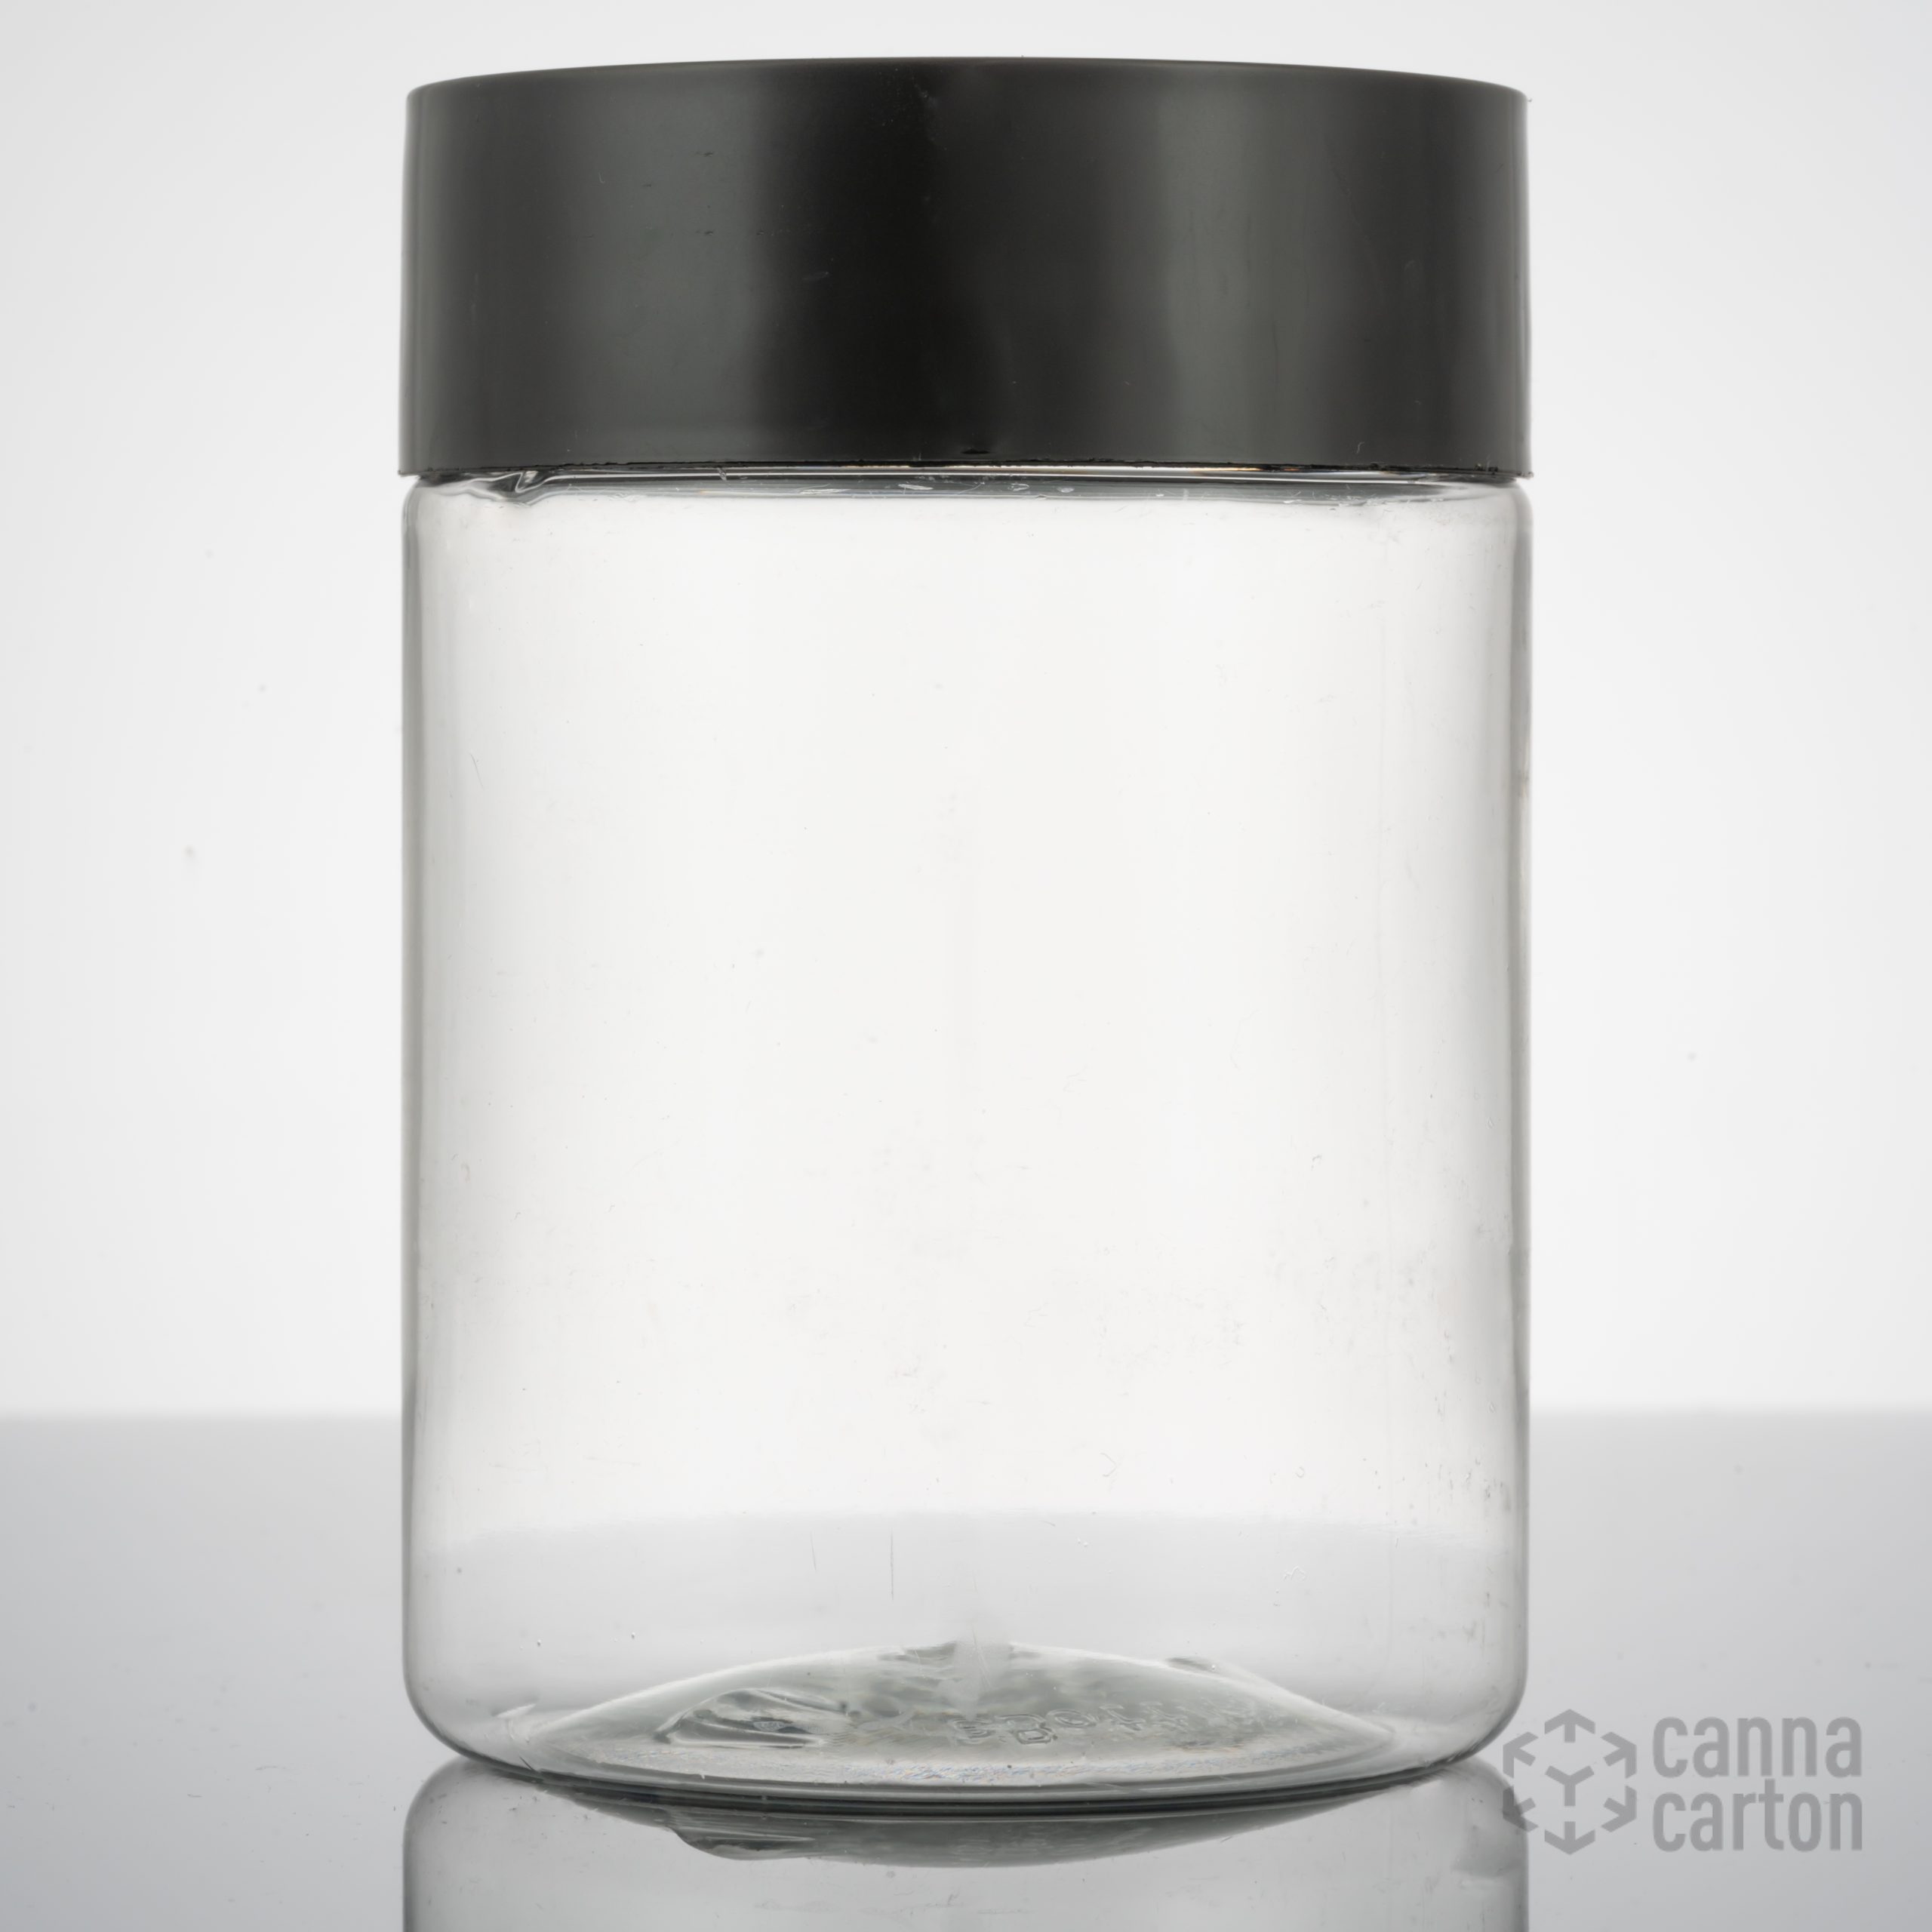 16 oz Plastic Jars, Clear PET Jars w/ Frosted Black Lined Caps